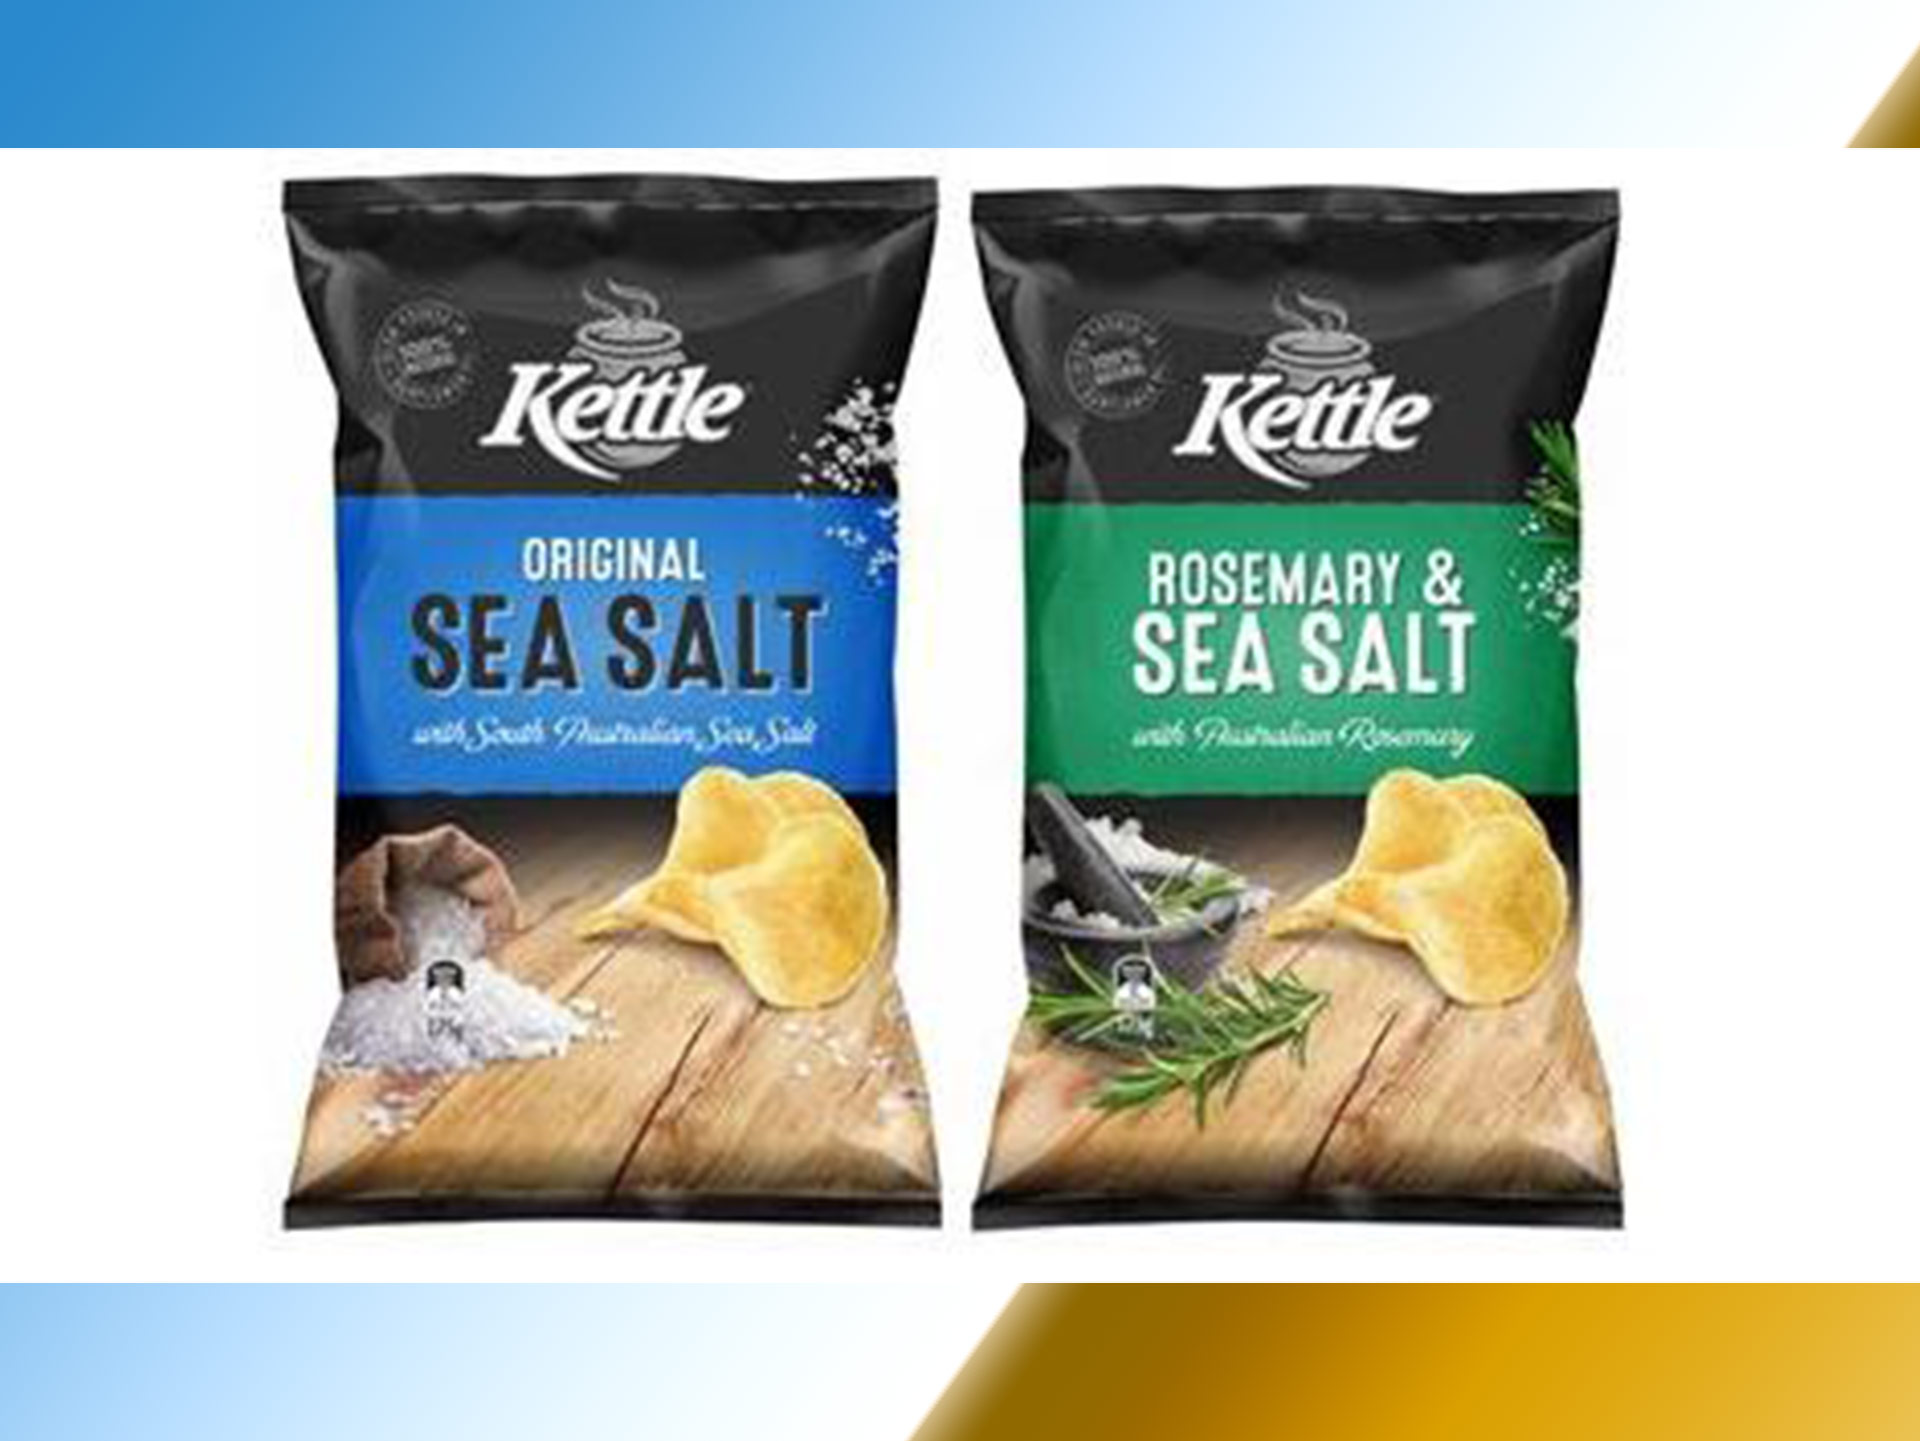 Sea Salt and Rosemary and Sea Salt flavoured Kettle Chips recalled in New South Wales